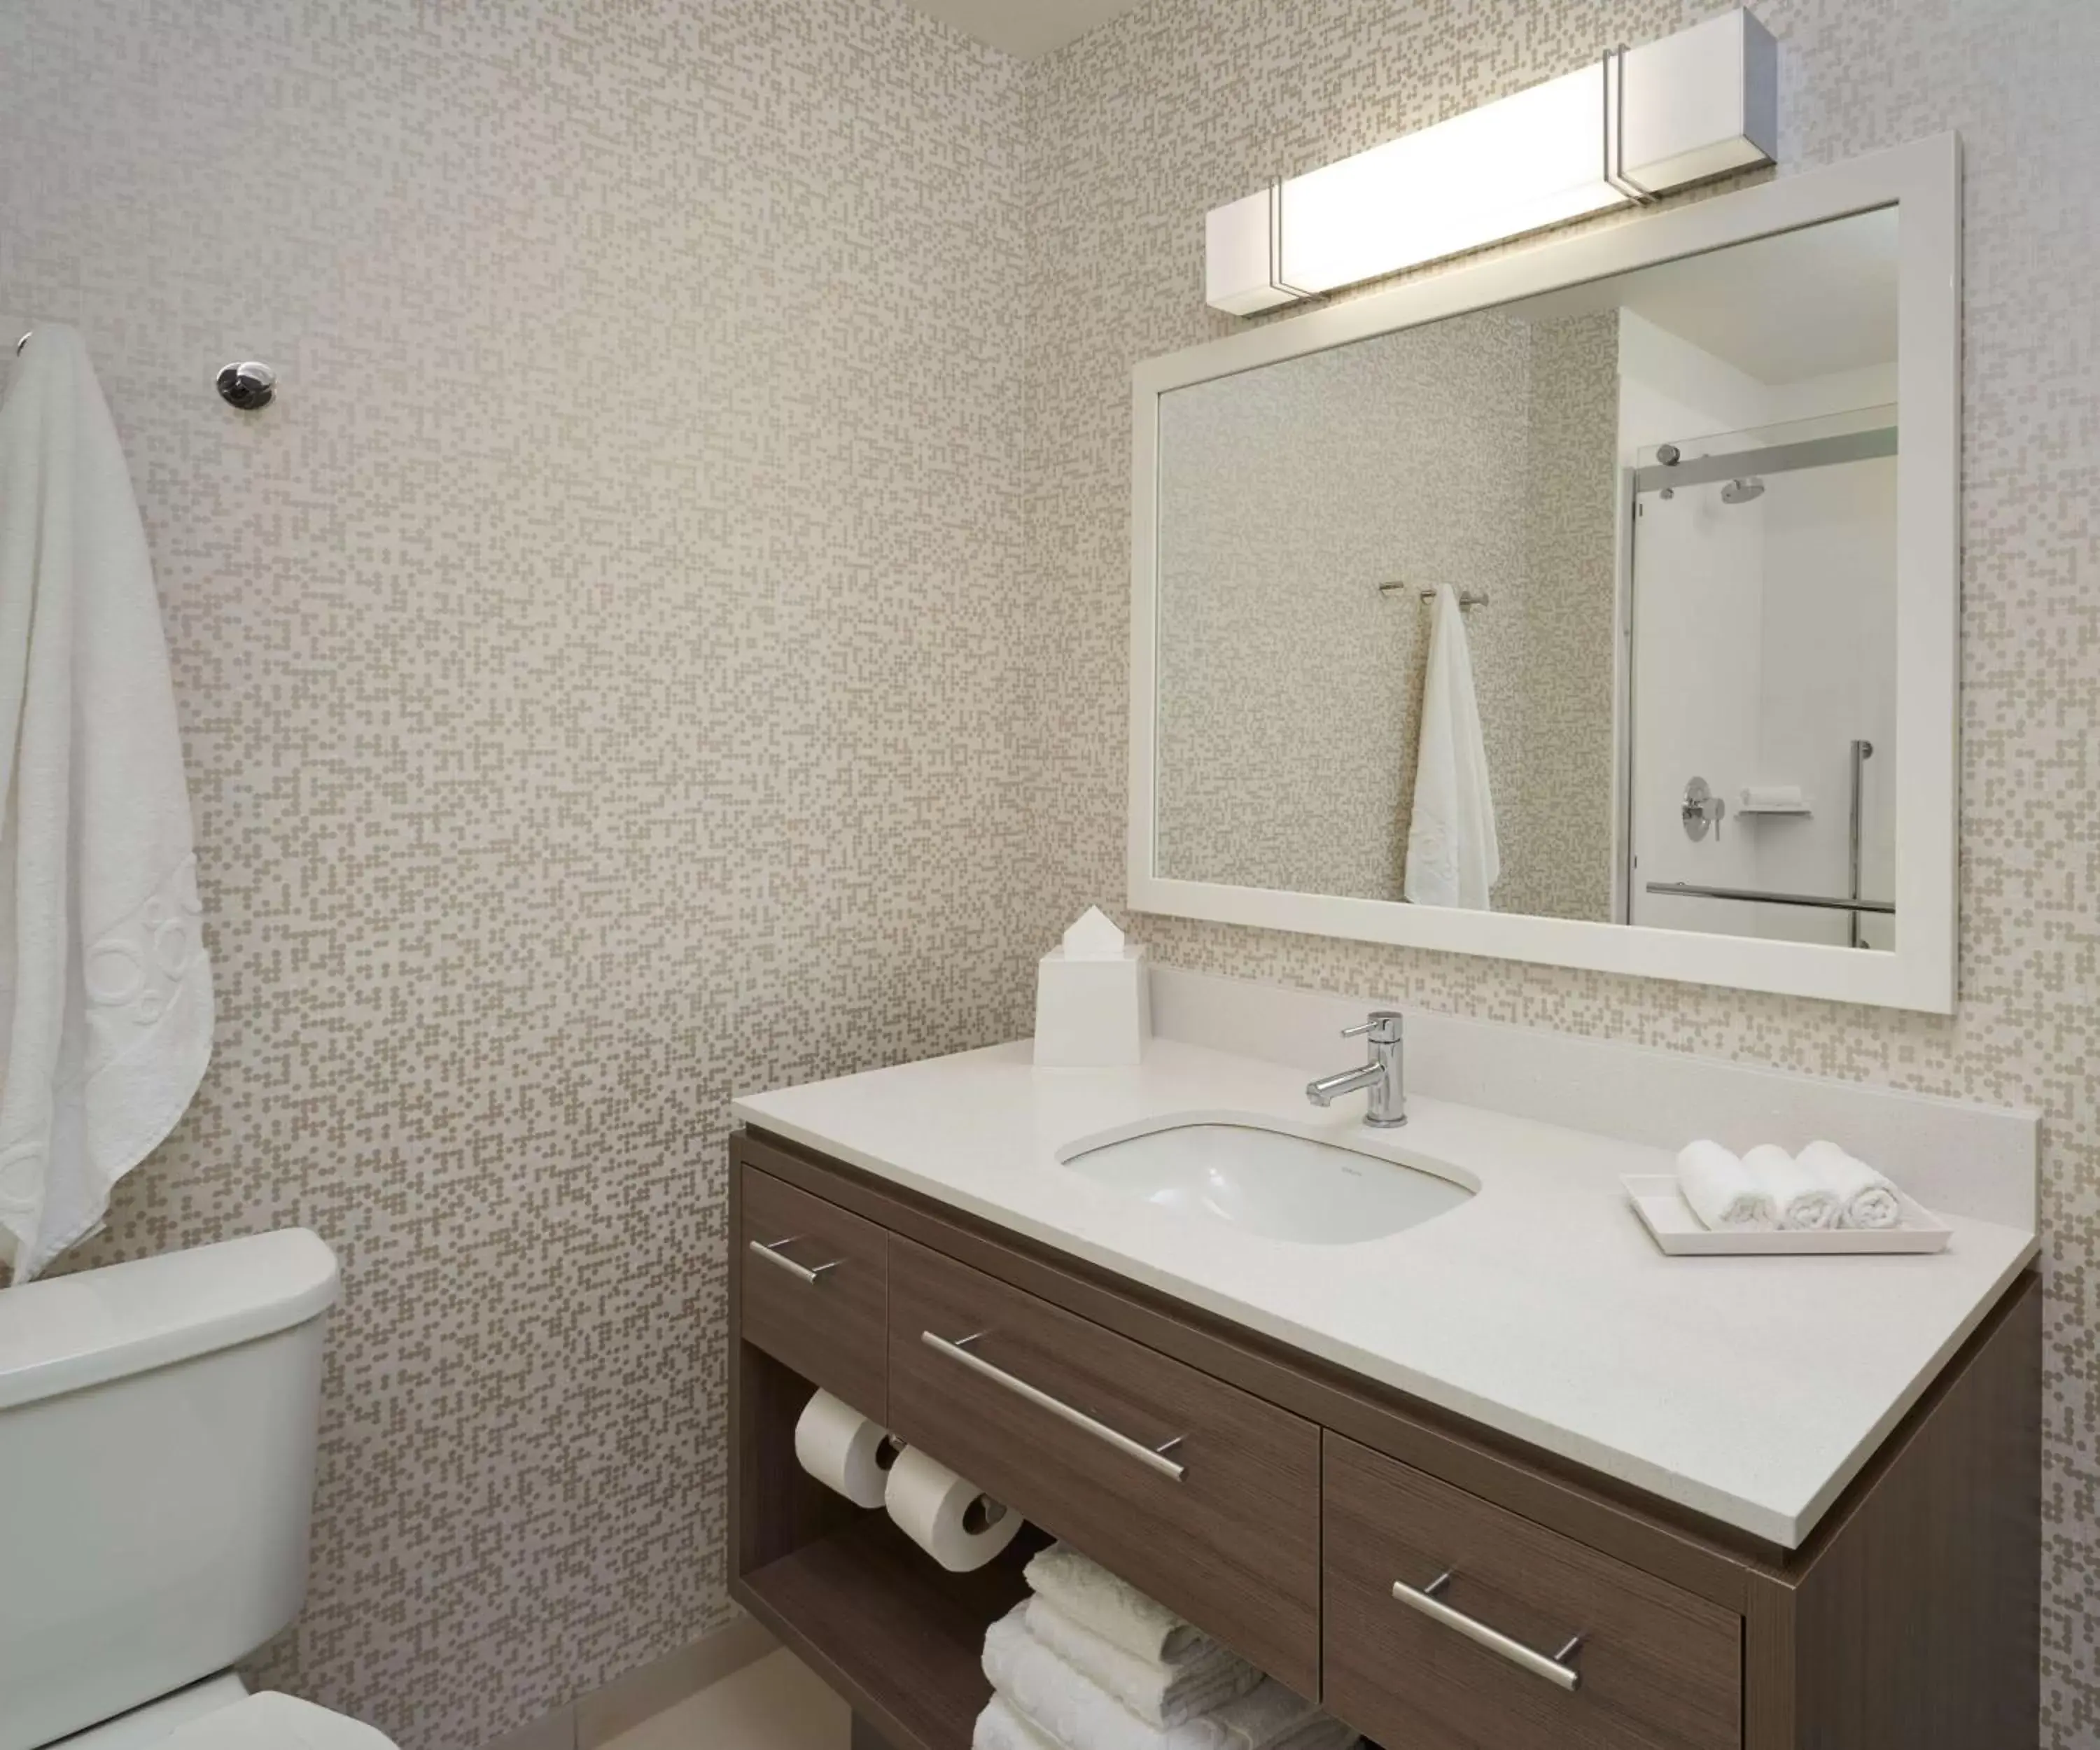 Bathroom in Home2 Suites By Hilton Ft. Lauderdale Downtown, Fl